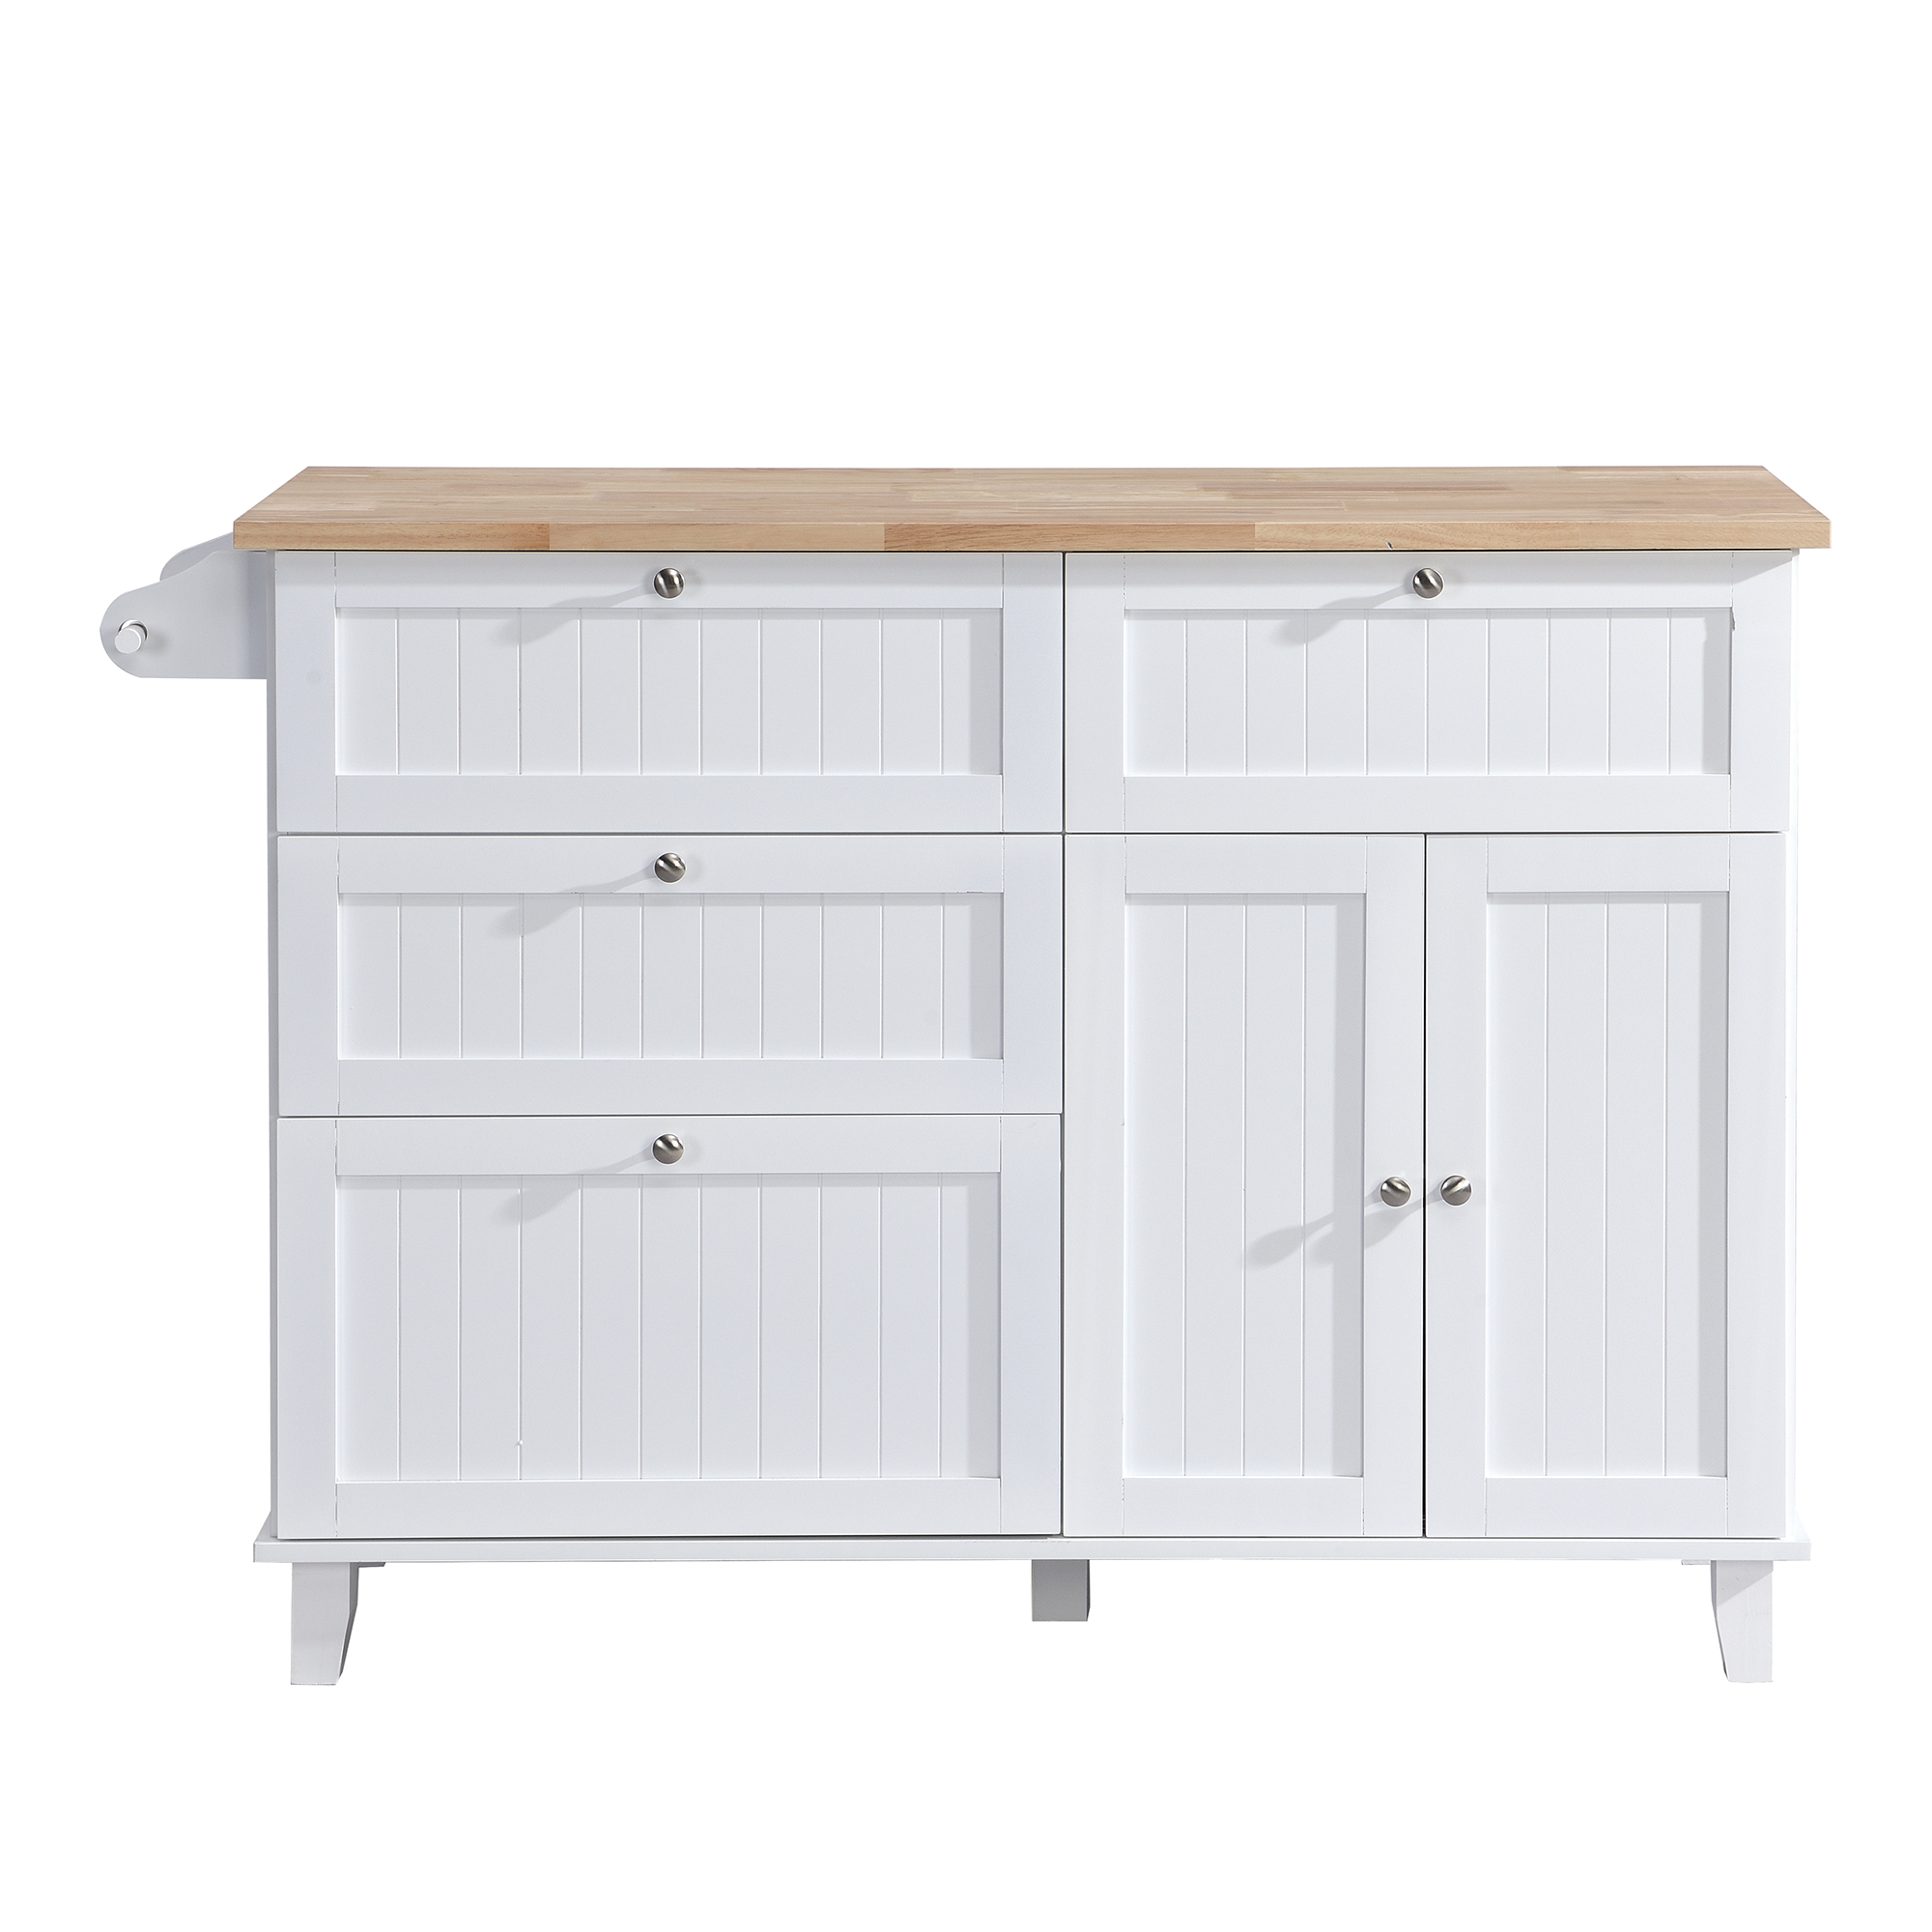 Farmhouse Counter Height Drop Leaf Kitchen Island Set with Stools - SH000234AAK